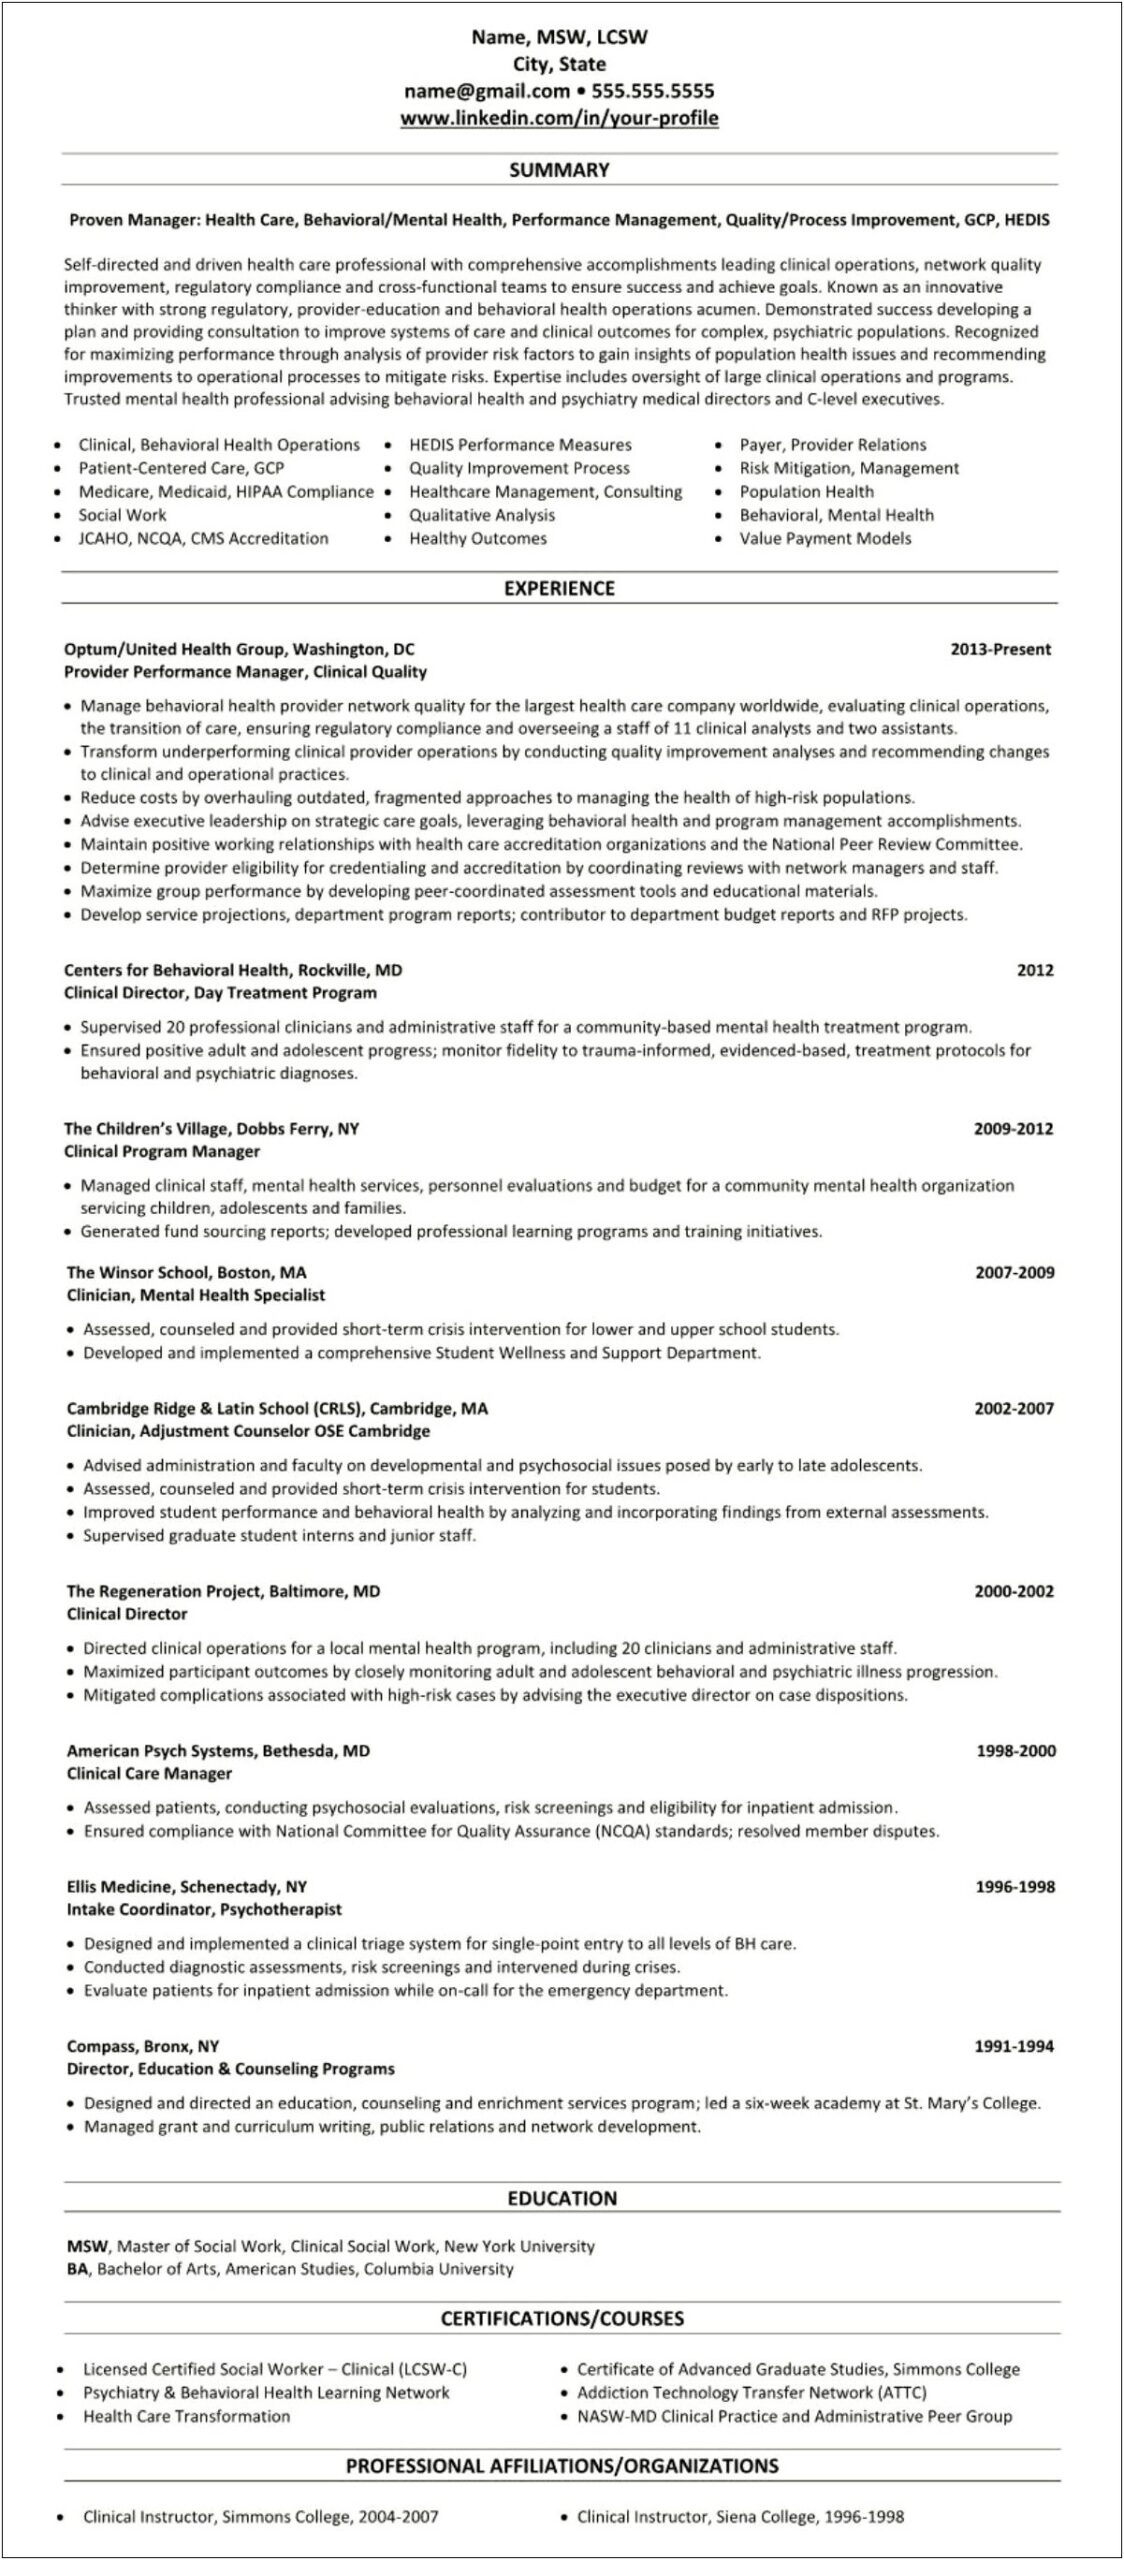 Example Of Resume For Msw